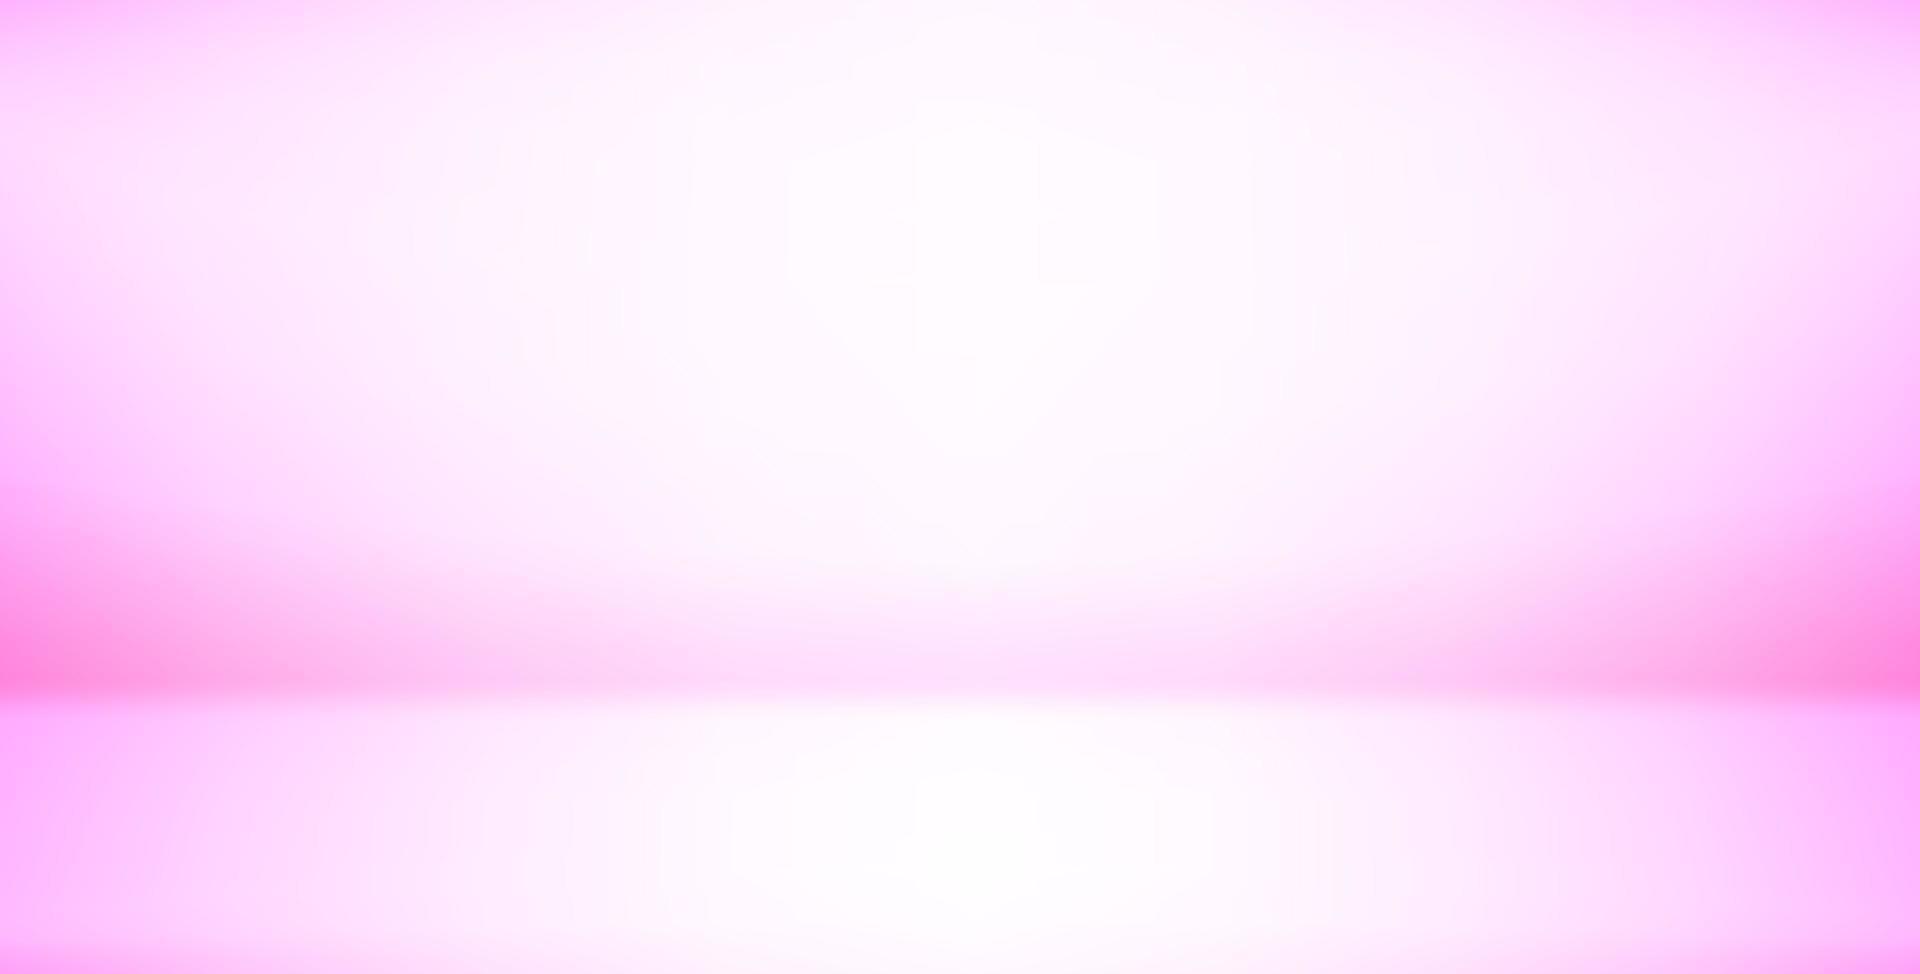 Violet empty room. Abstract background. Template for design vector